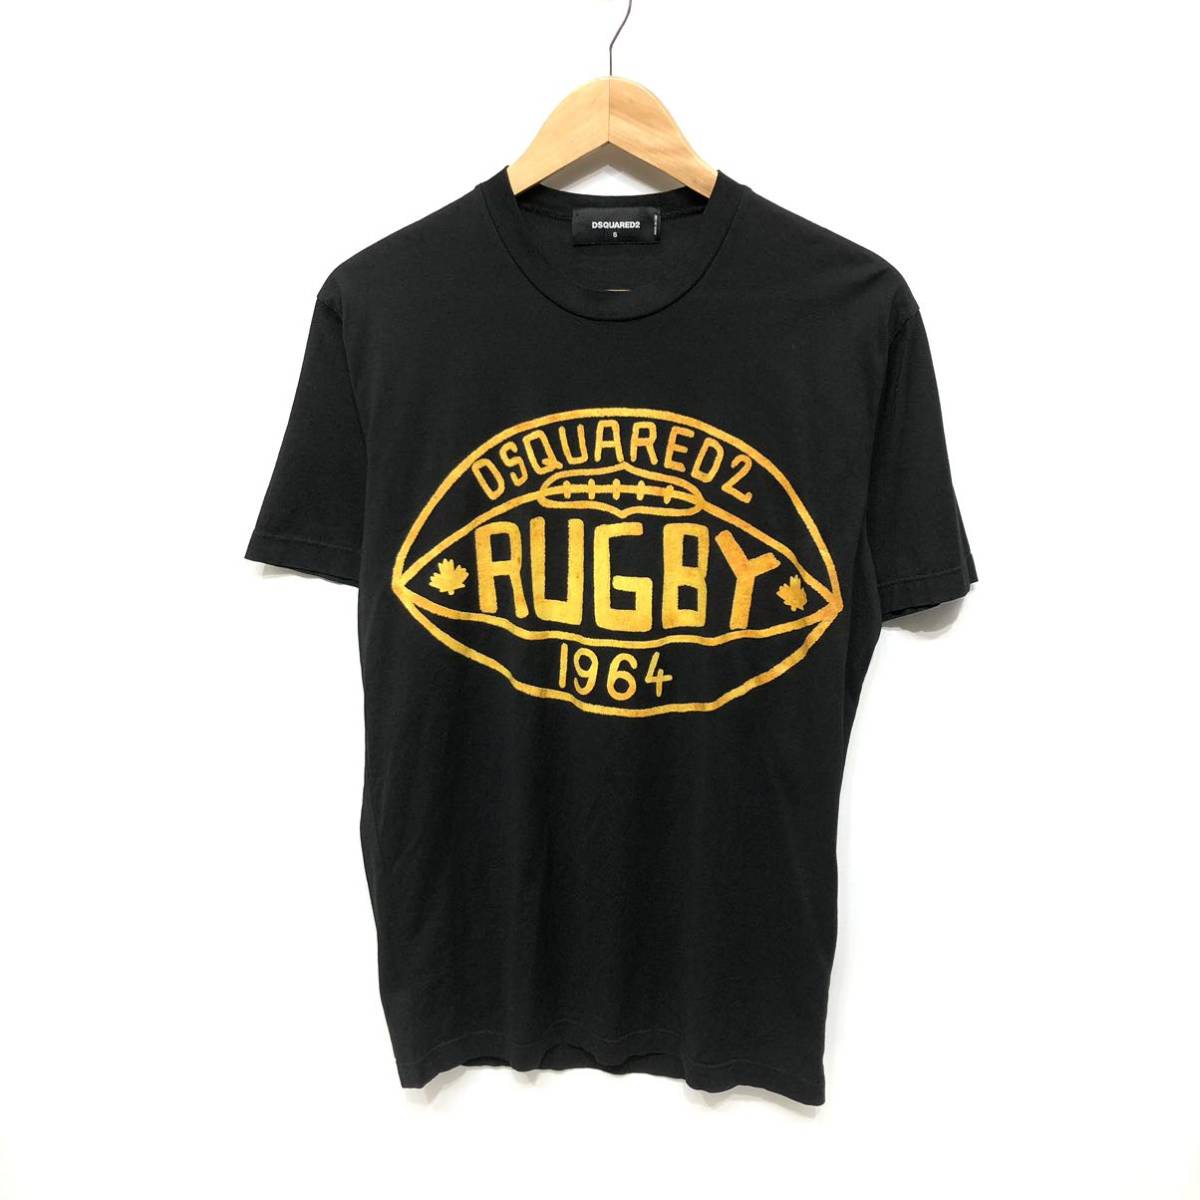 DSQUARED2 ディースクエアード 半袖Tシャツ カットソー ブラック サイズS プリント ラグビー RUGBY S74GD0717 S22427